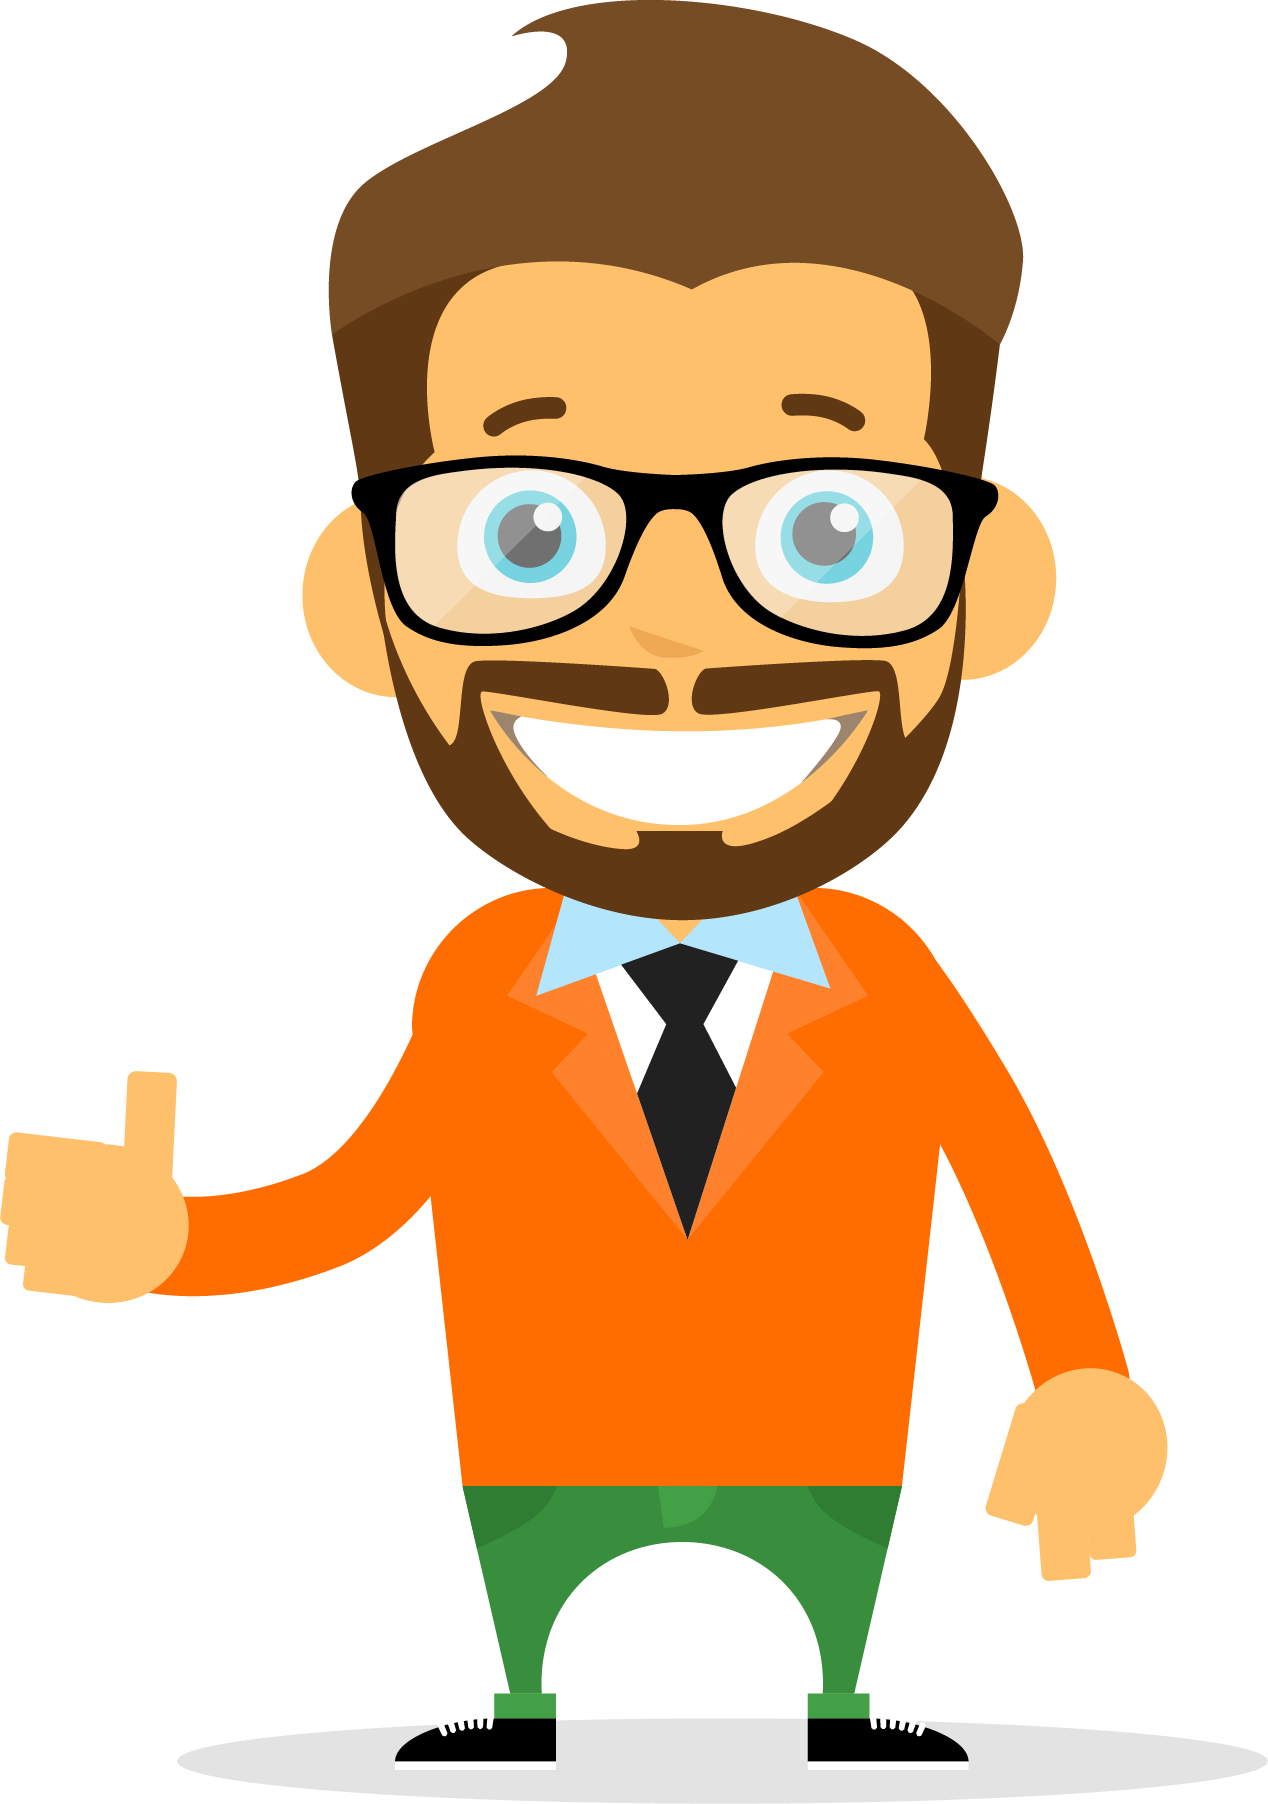 Cartoon People PNG Images HD